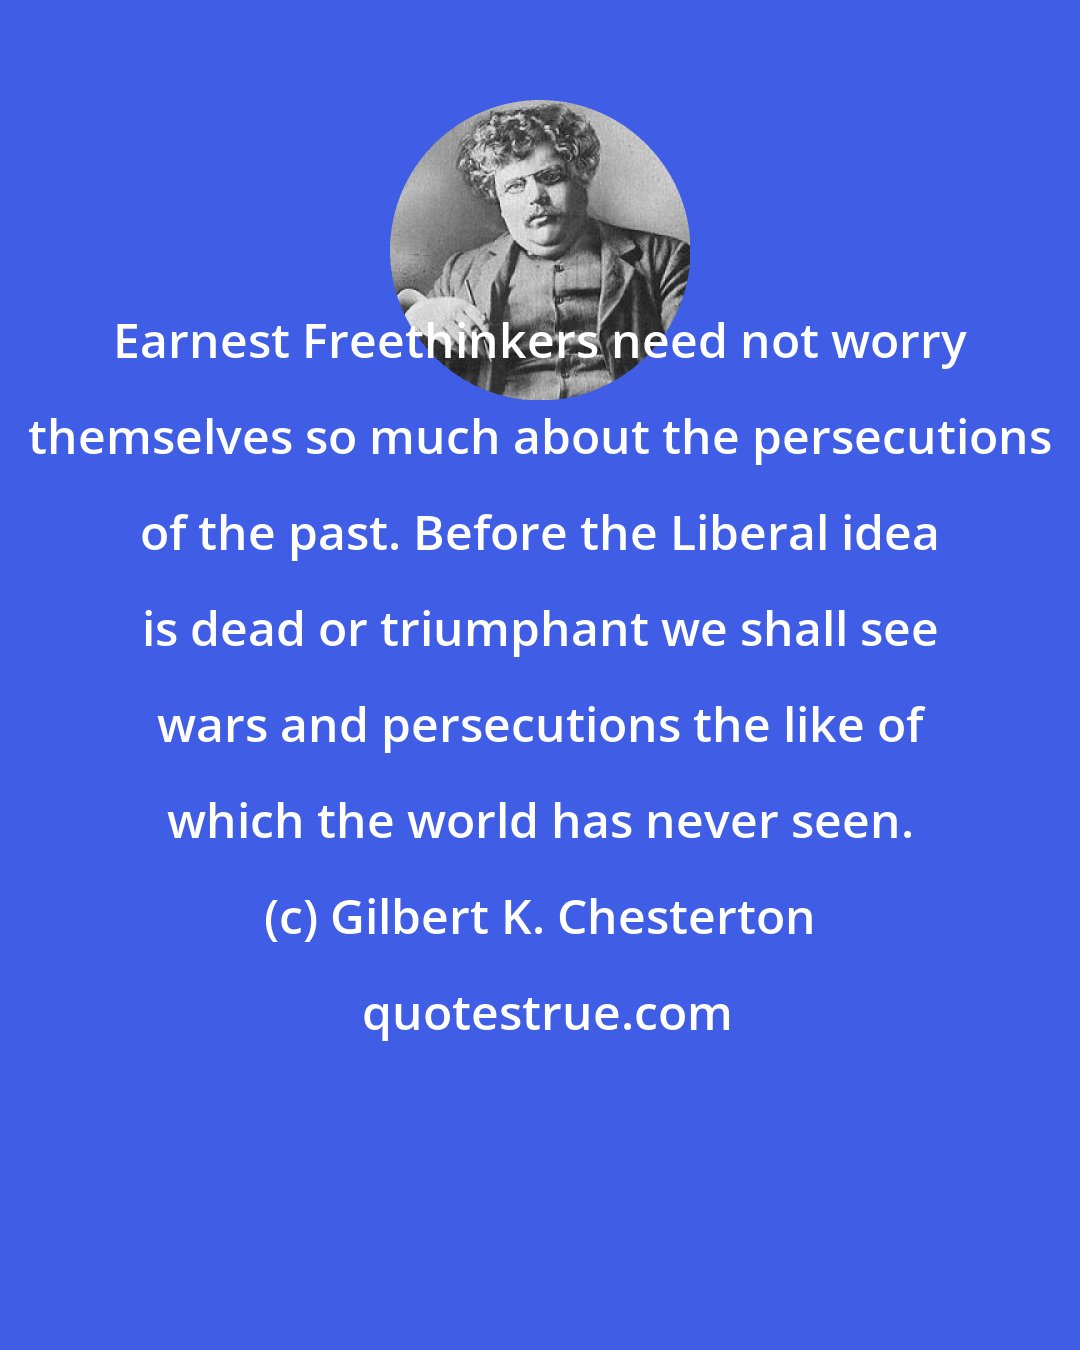 Gilbert K. Chesterton: Earnest Freethinkers need not worry themselves so much about the persecutions of the past. Before the Liberal idea is dead or triumphant we shall see wars and persecutions the like of which the world has never seen.